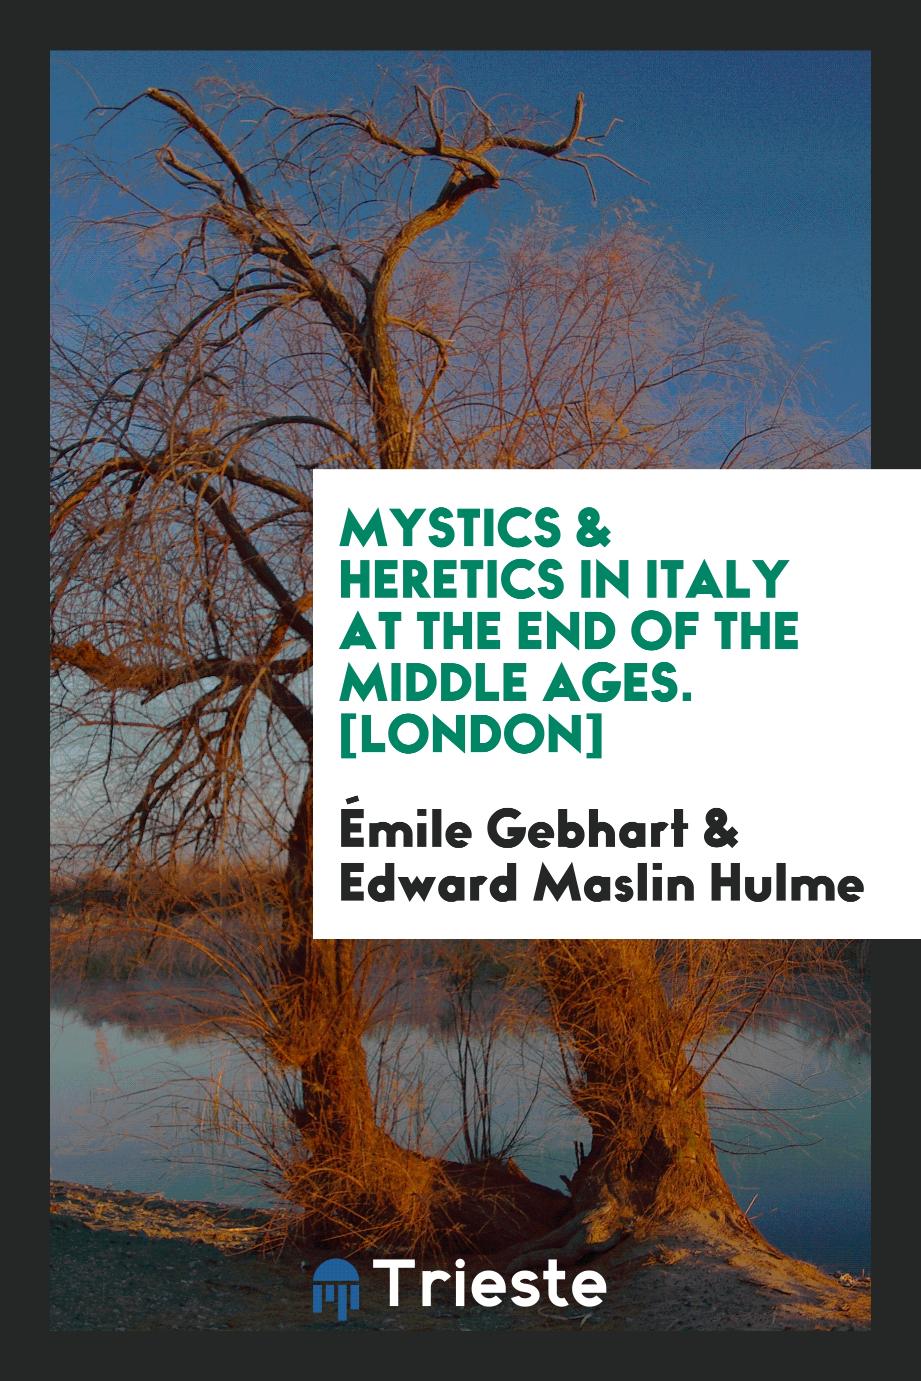 Mystics & Heretics in Italy at the End of the Middle Ages. [London]